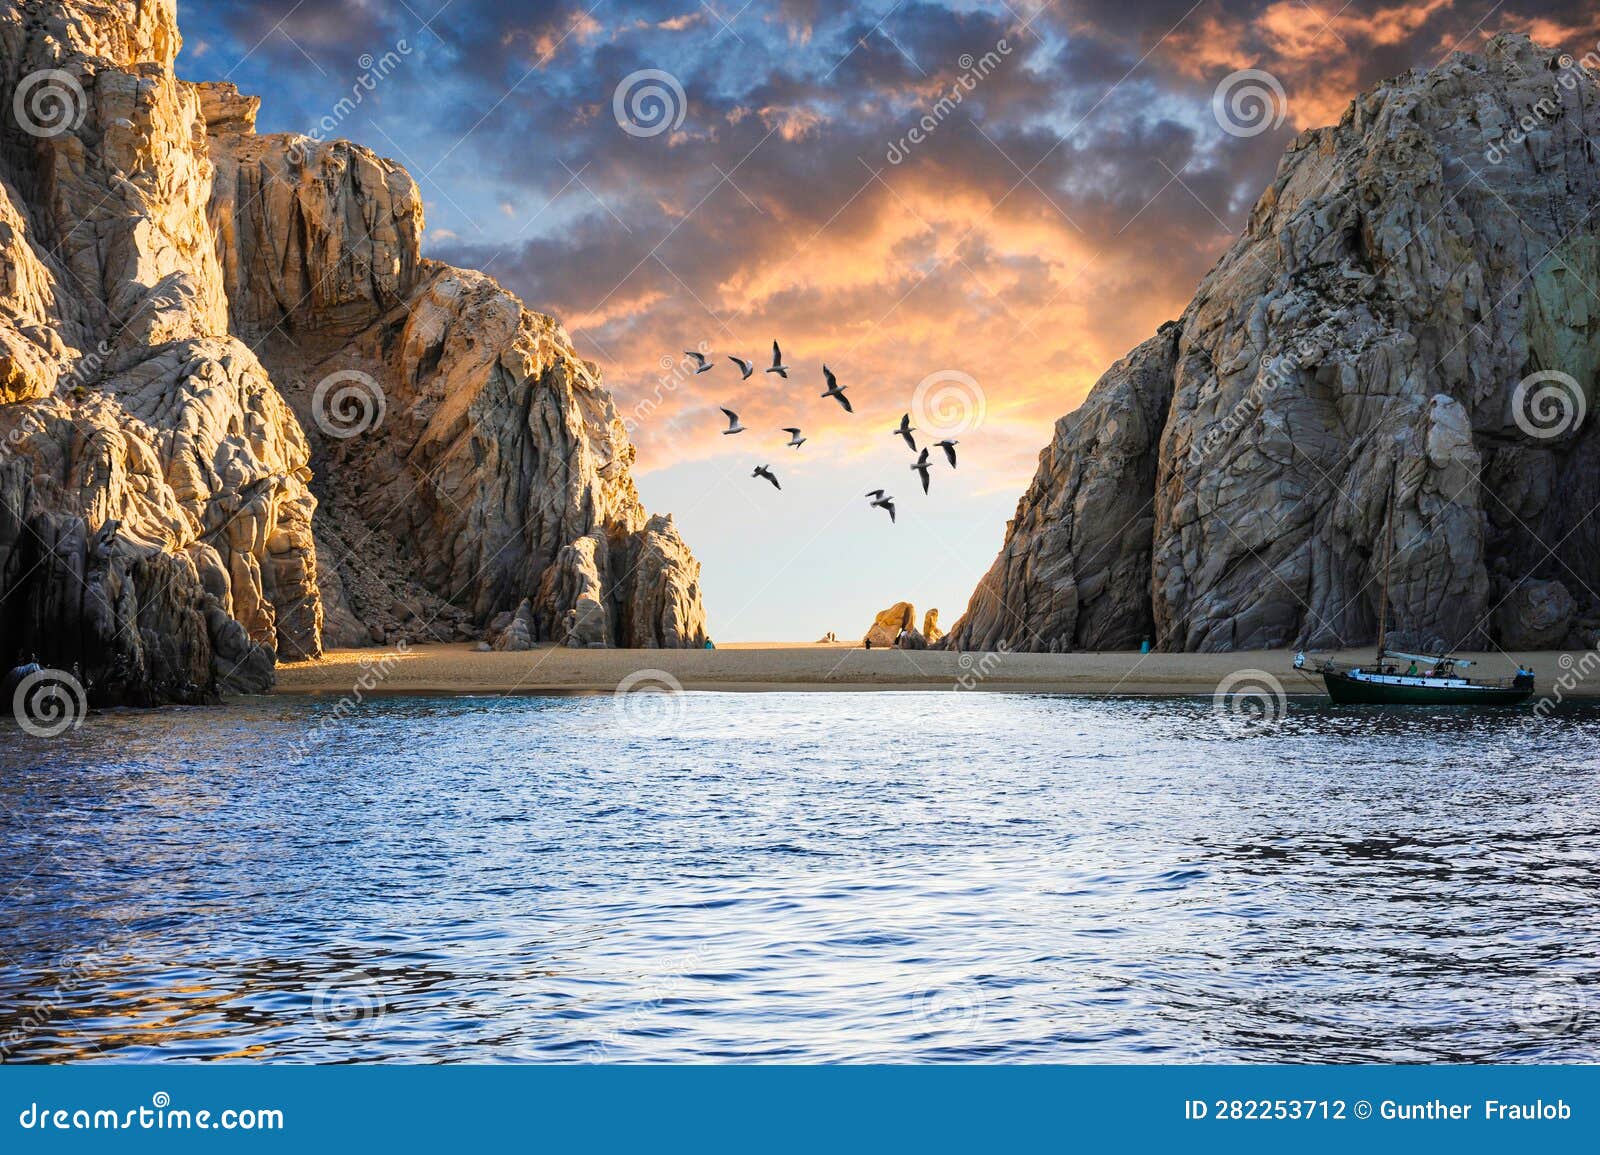 sunset on a little beach close to cabo san lucas' el arco arch.